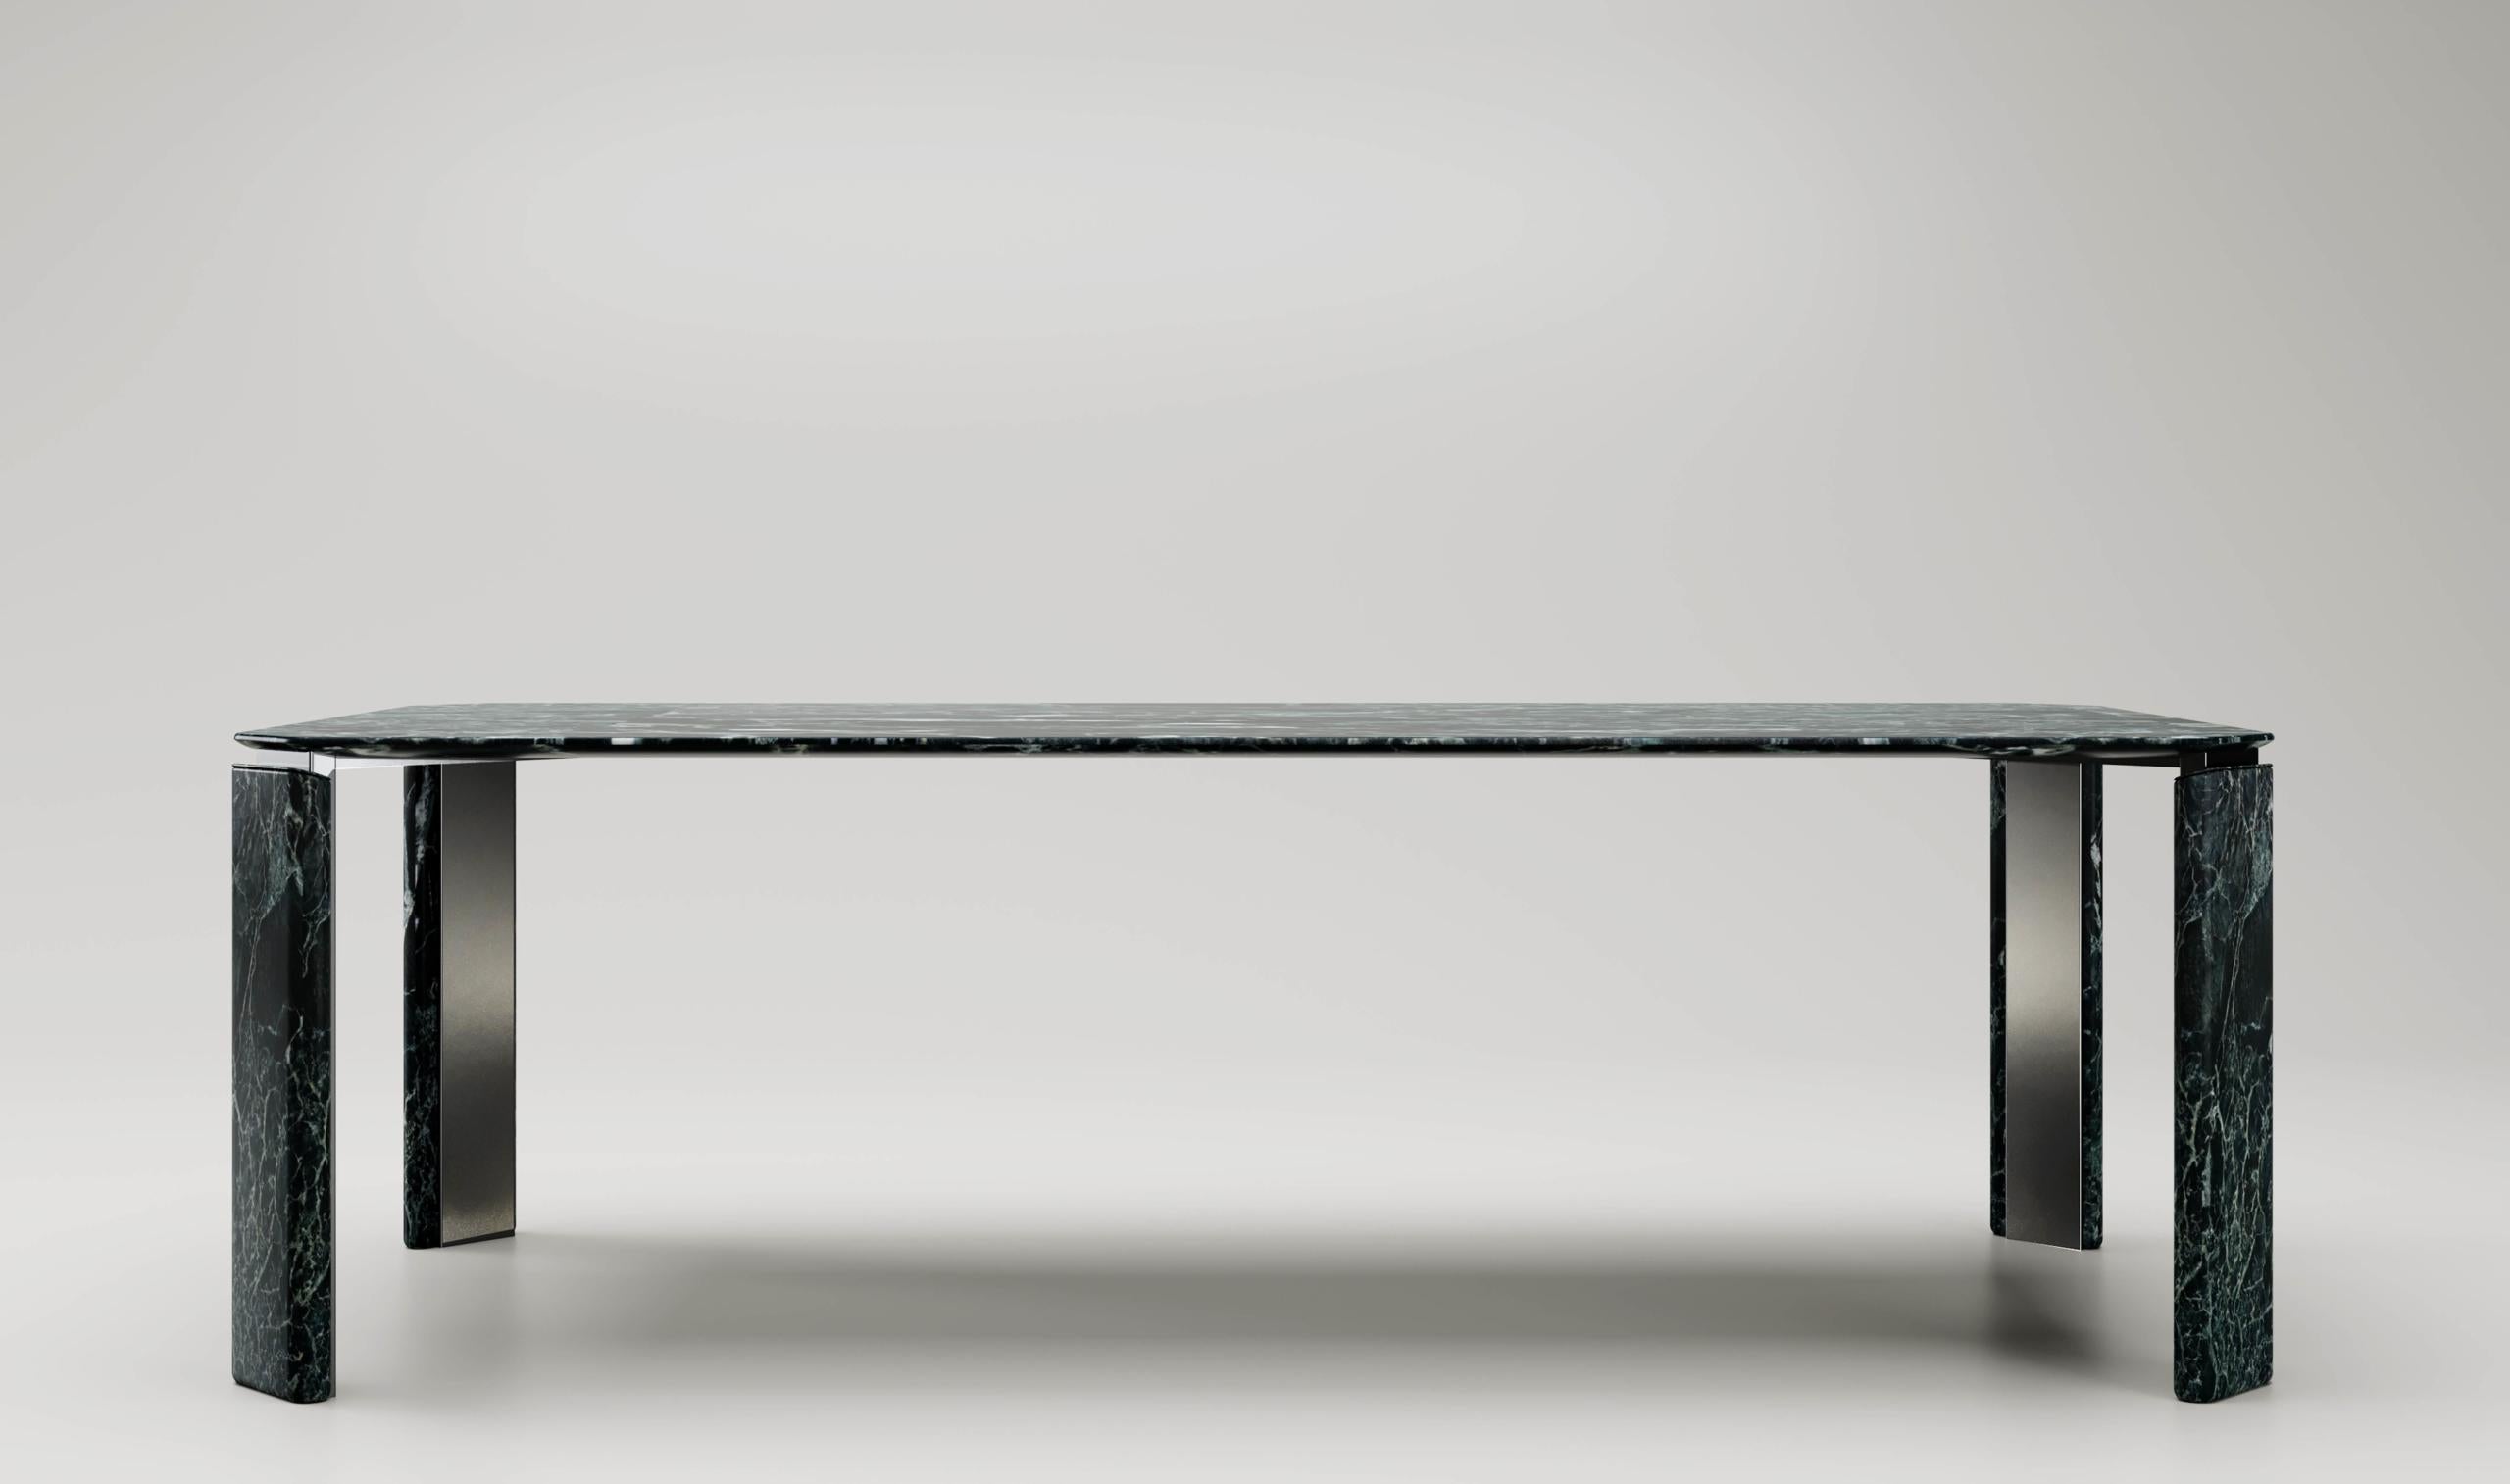 XLV Table by Andrea Bonini
Limited Edition
Dimensions: D 108 x W 250 x H 75 cm.
Materials: Mirrored steel and St. Denis Marble.

Made in Italy. Limited series, numbered and signed pieces. Custom size or finish on request. Different marble options